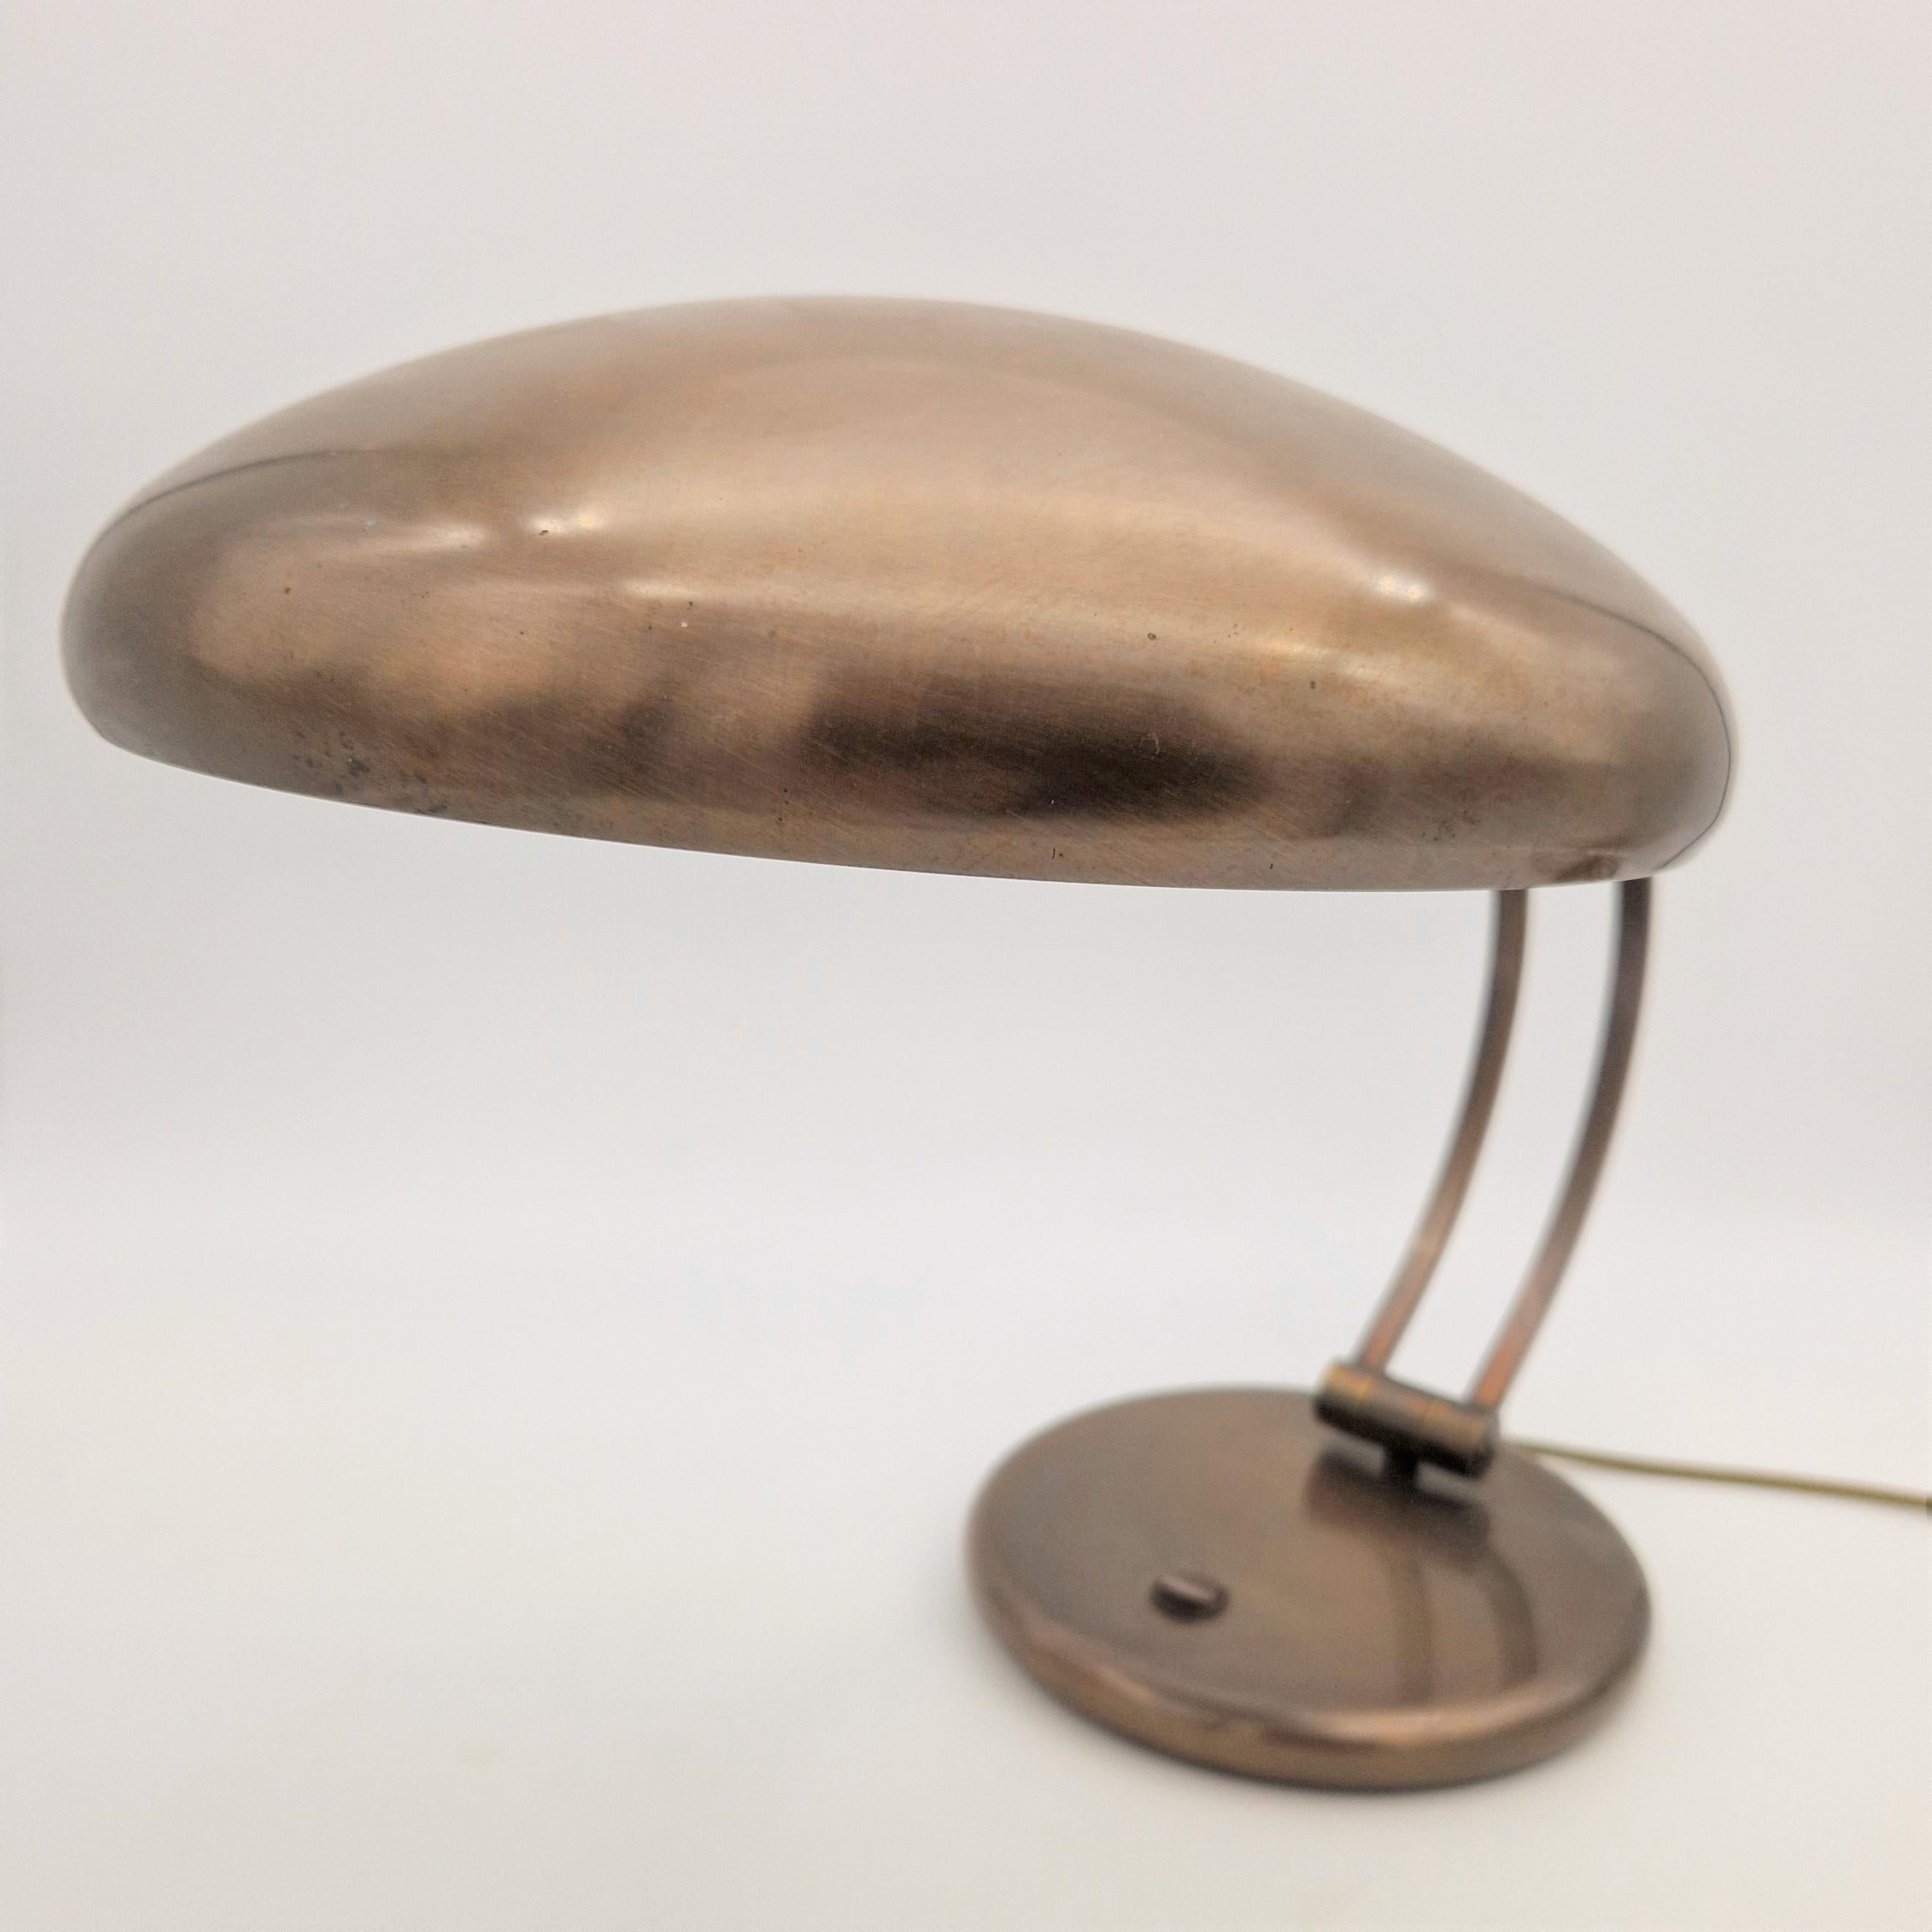 Design table lamp by Egon Hillebrand. Germany 1970 - 1975 For Sale 3